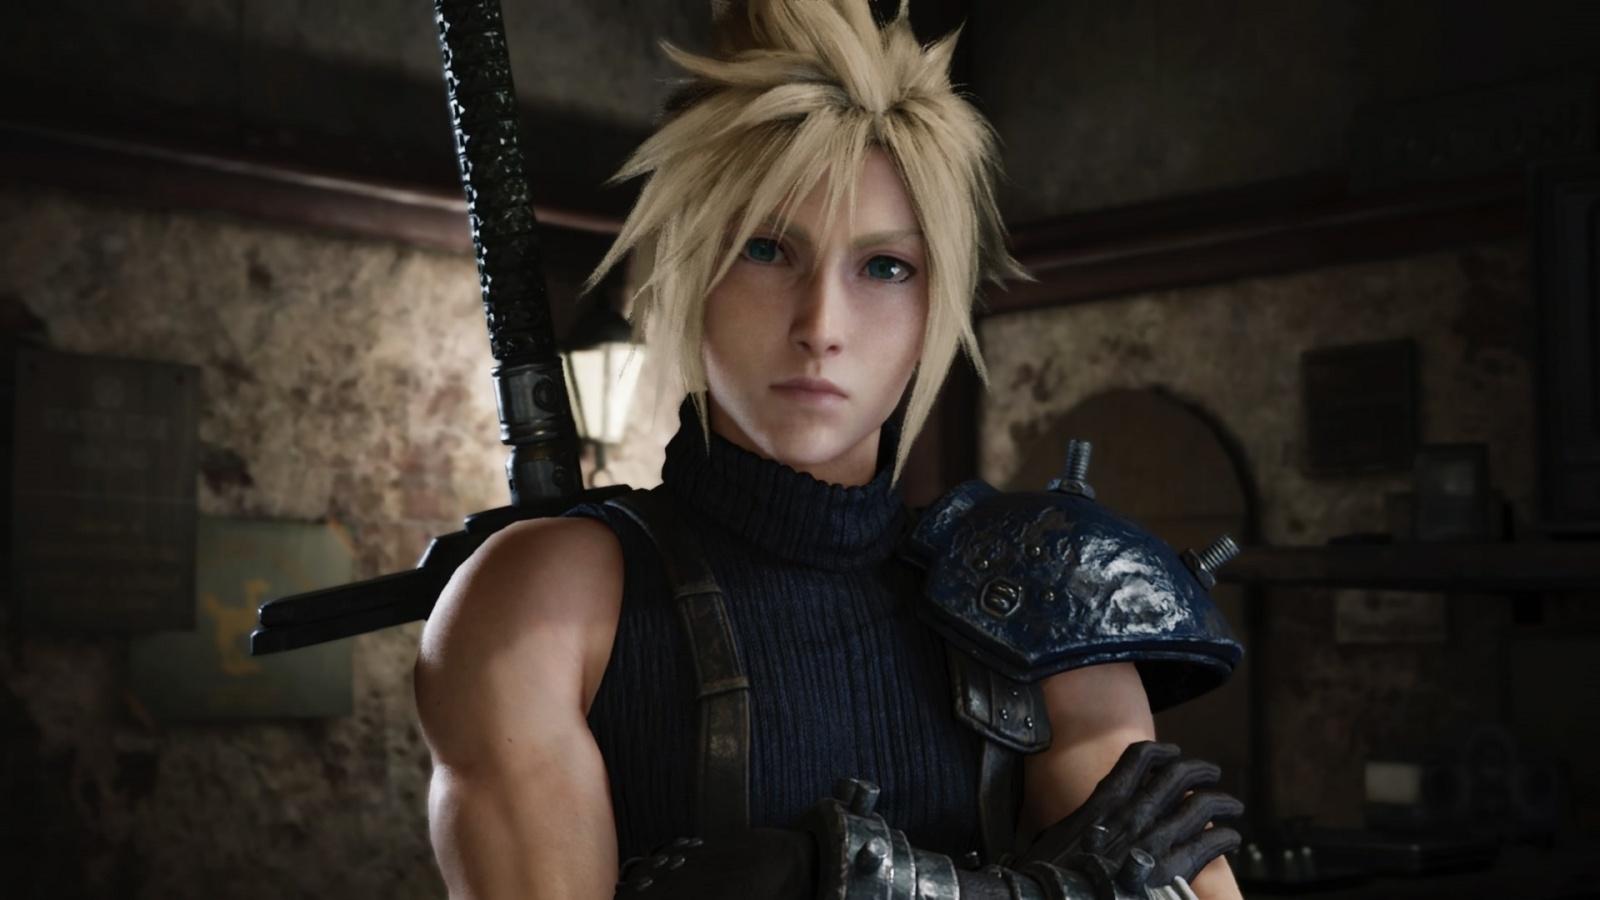 Final Fantasy 7 Remake comes to PC next week